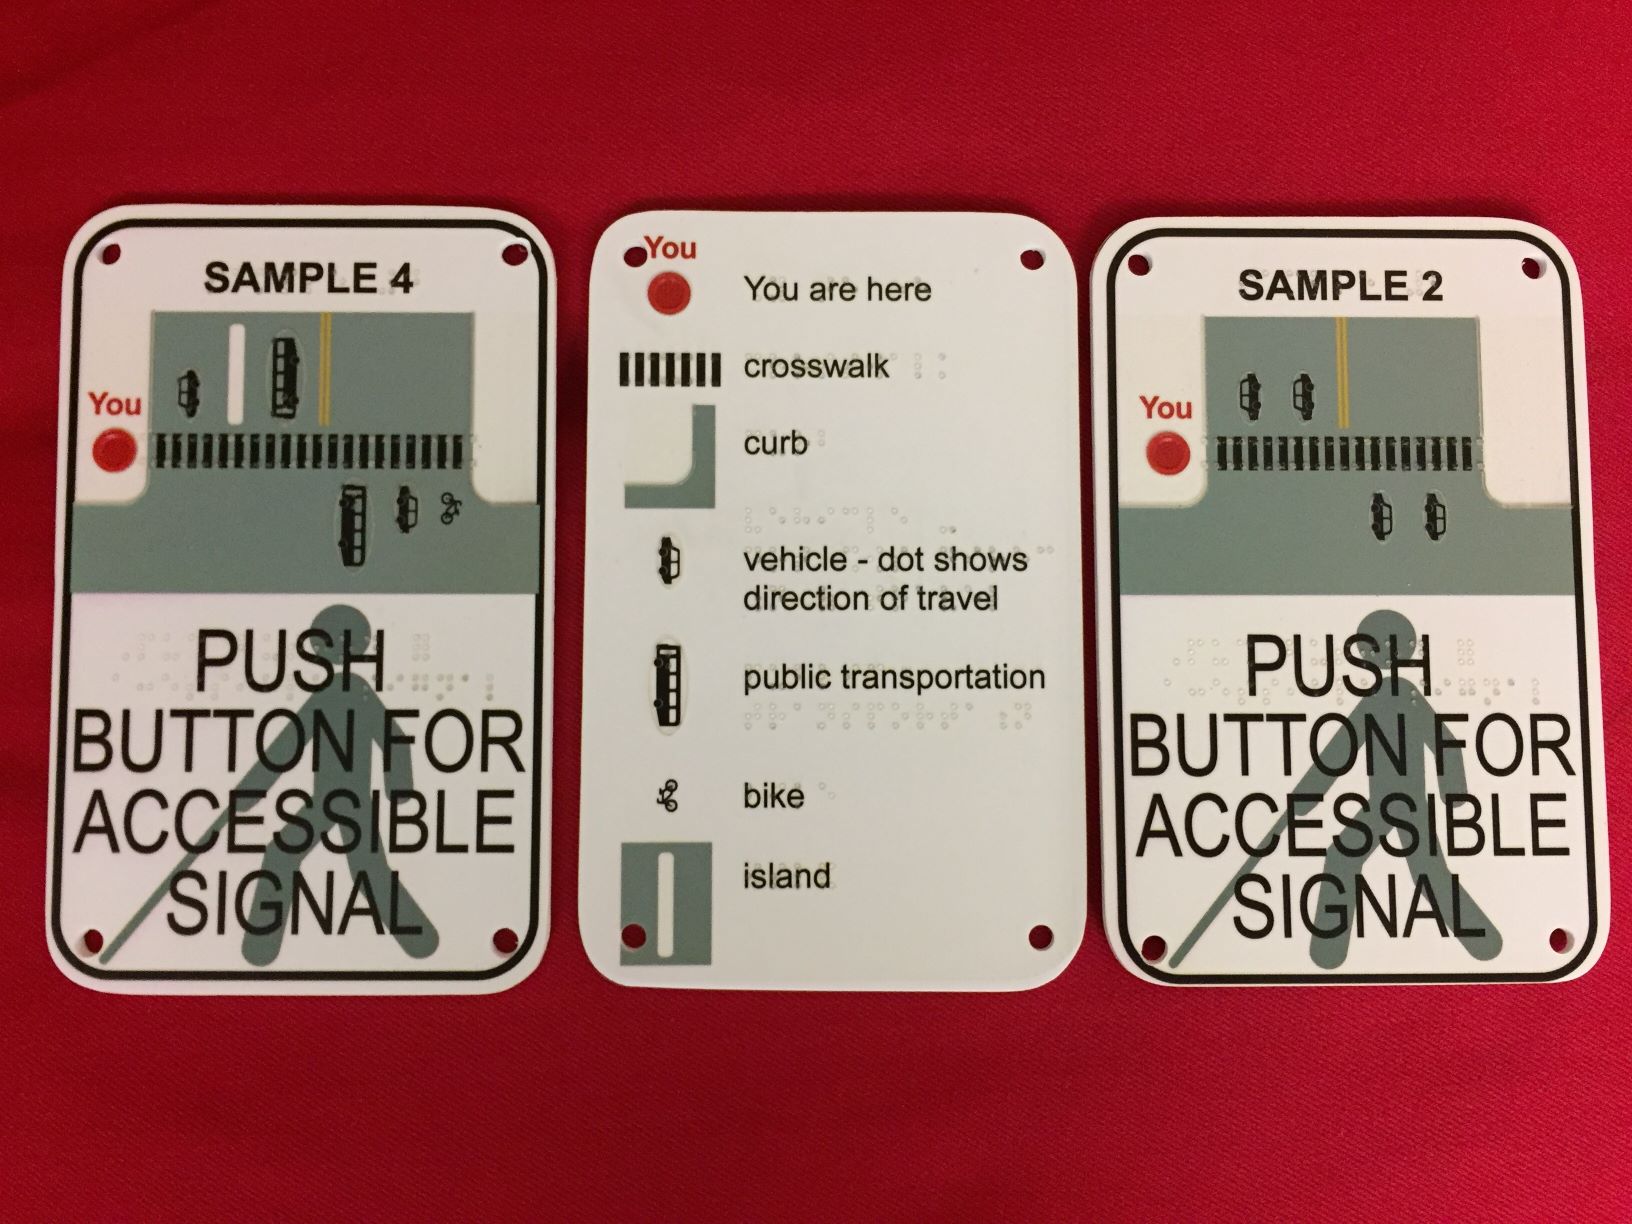 Three sample pedestrian crossing signs, key to symbols in the middle, samples to left and right